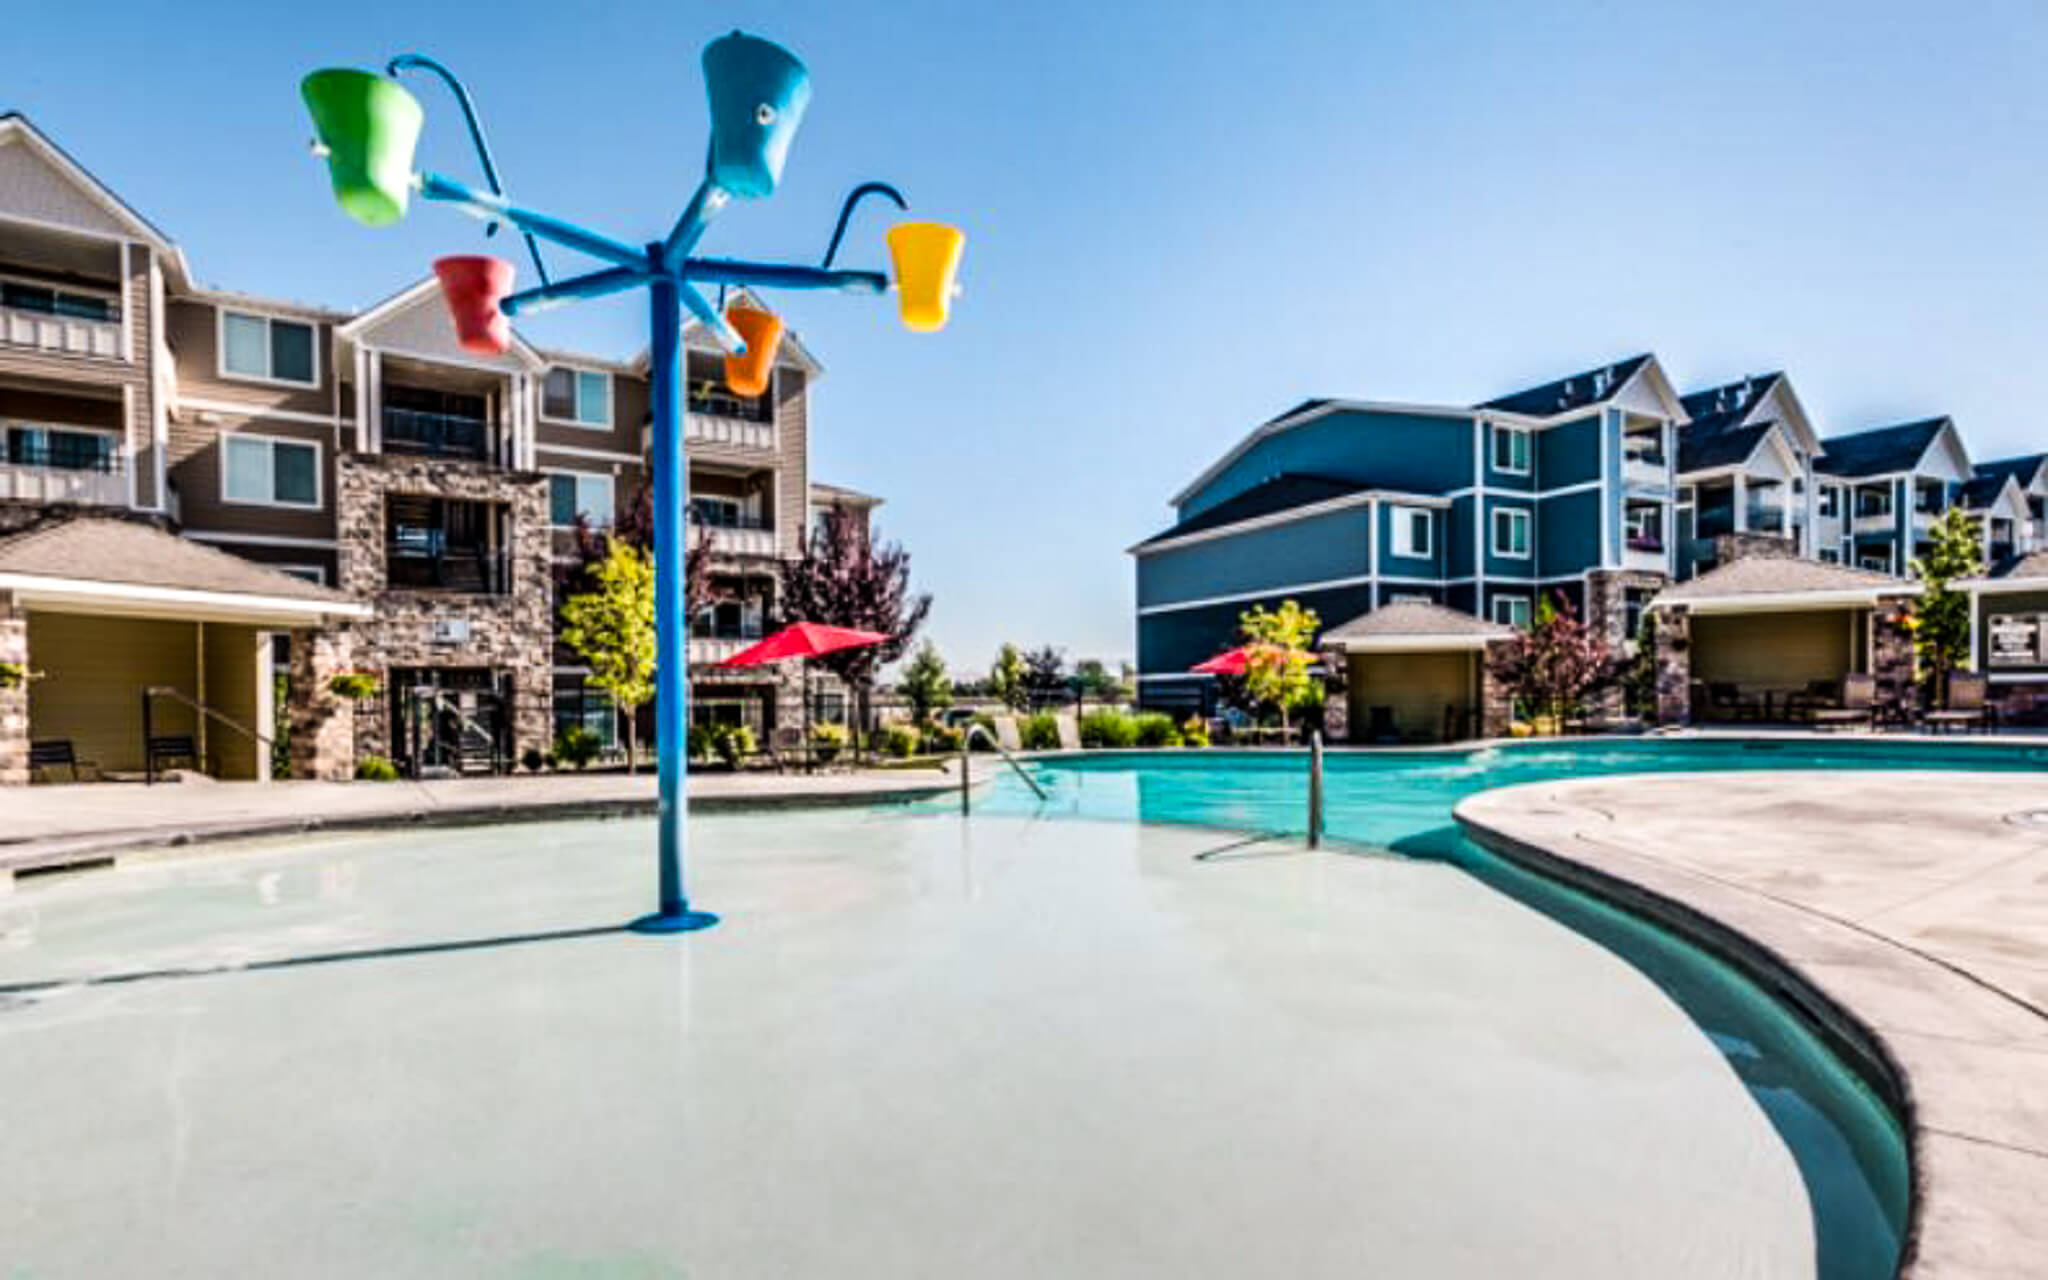 Paragon Corporate Housing - The Regency at River Valley Apartments - Meridian Idaho